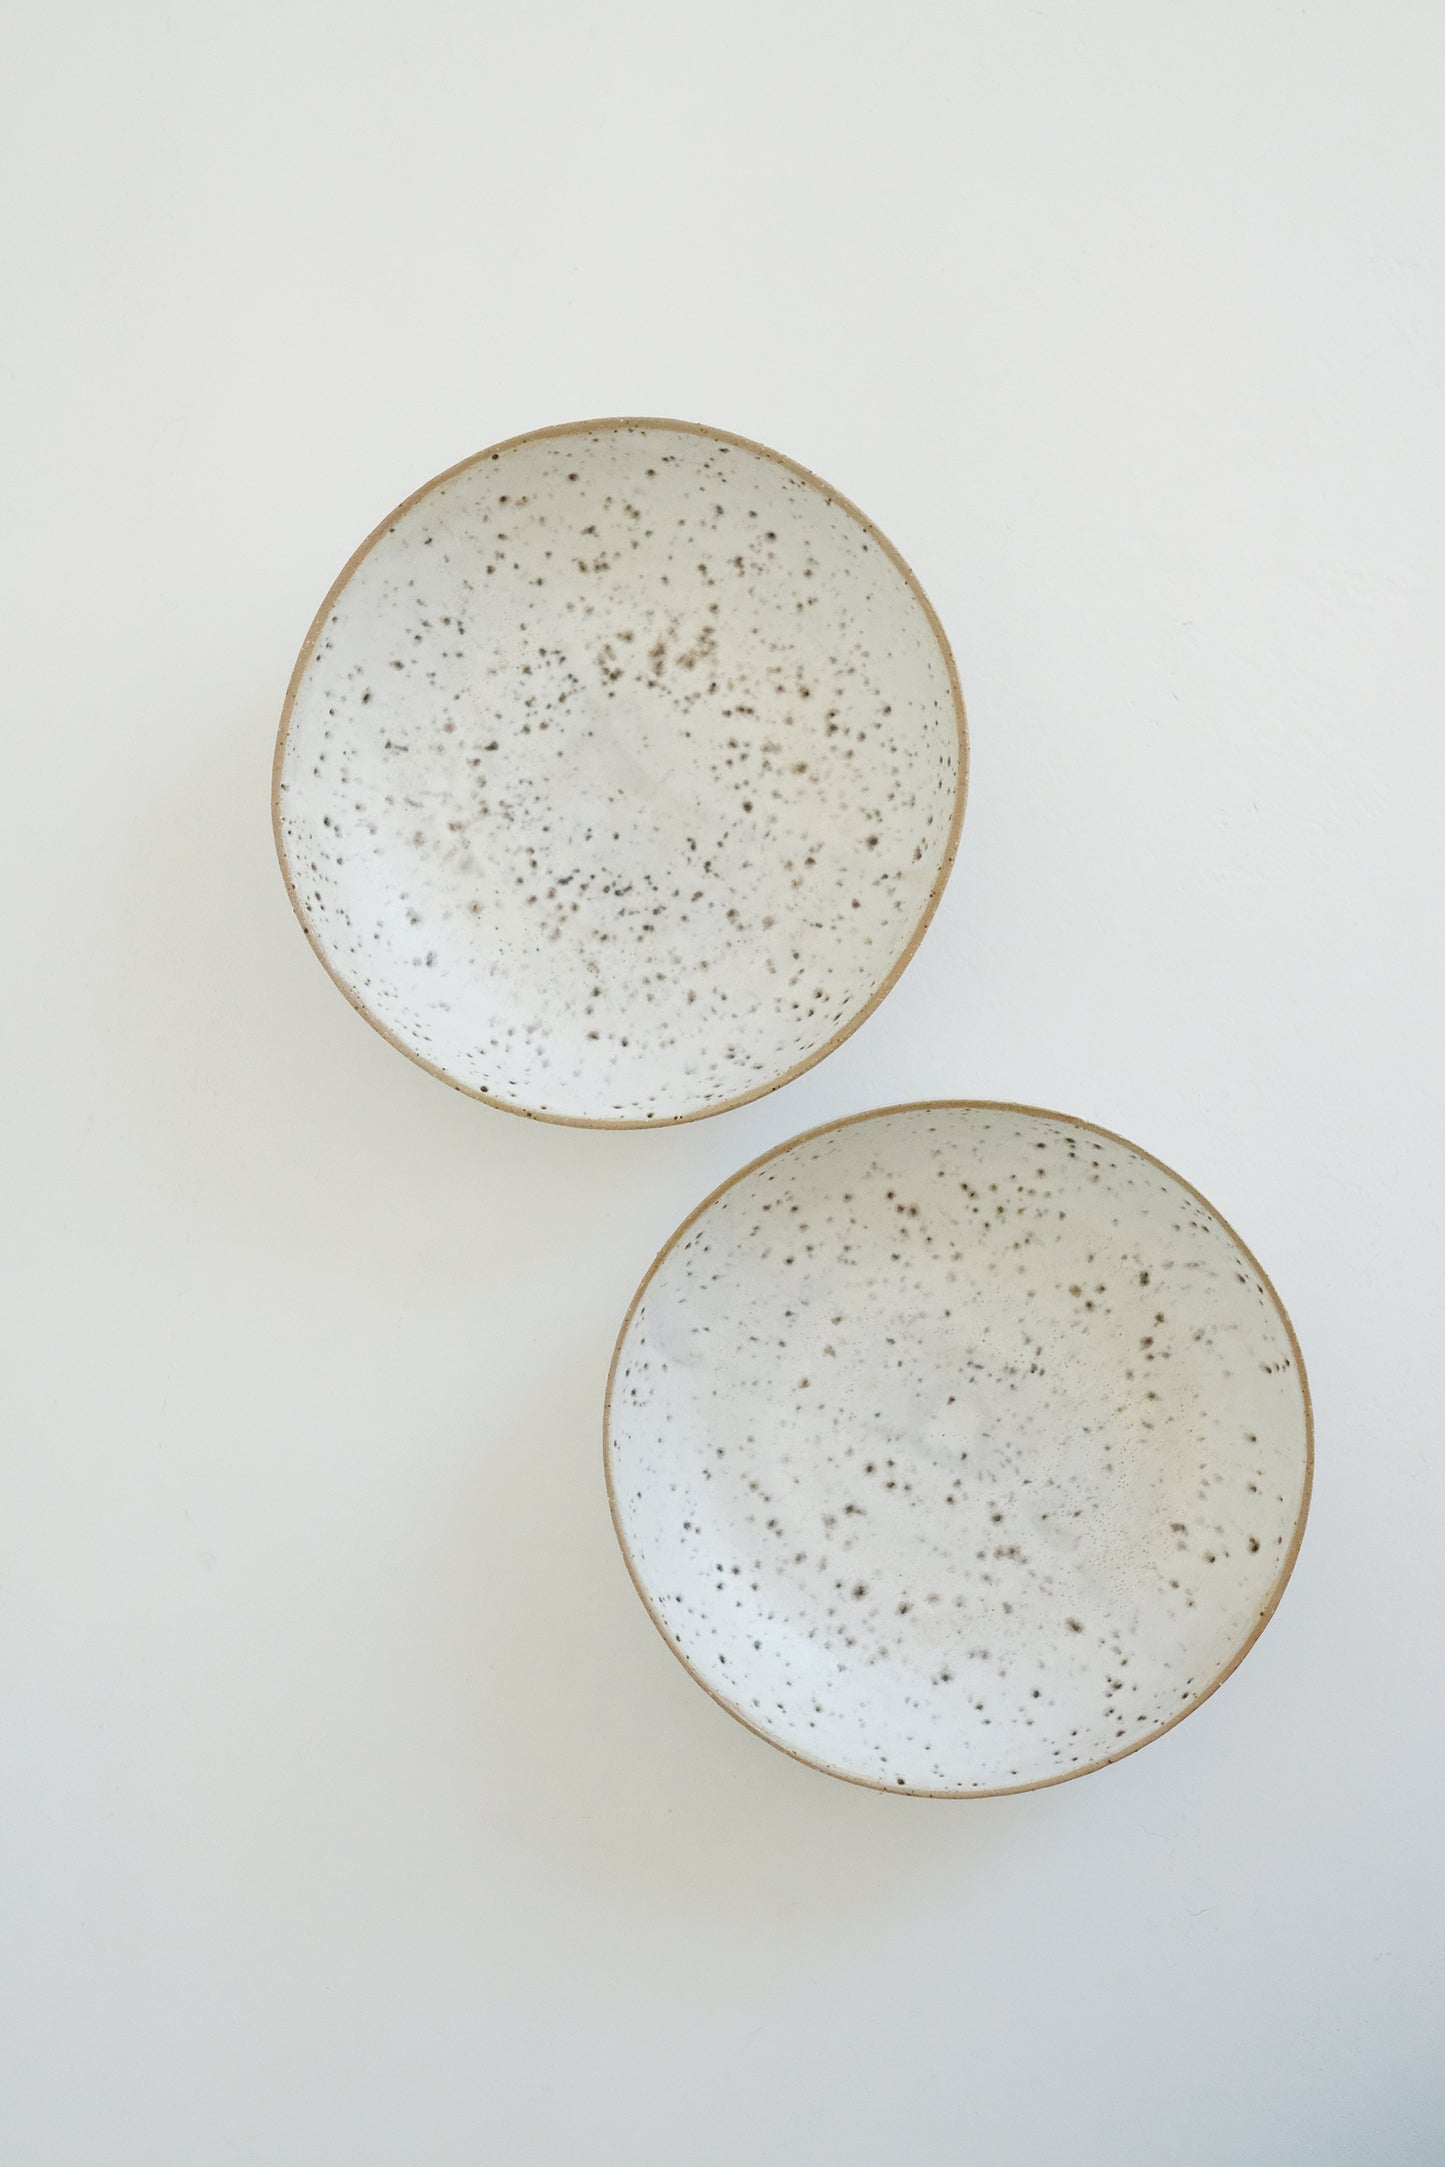 low snack bowls #1 - set of 2